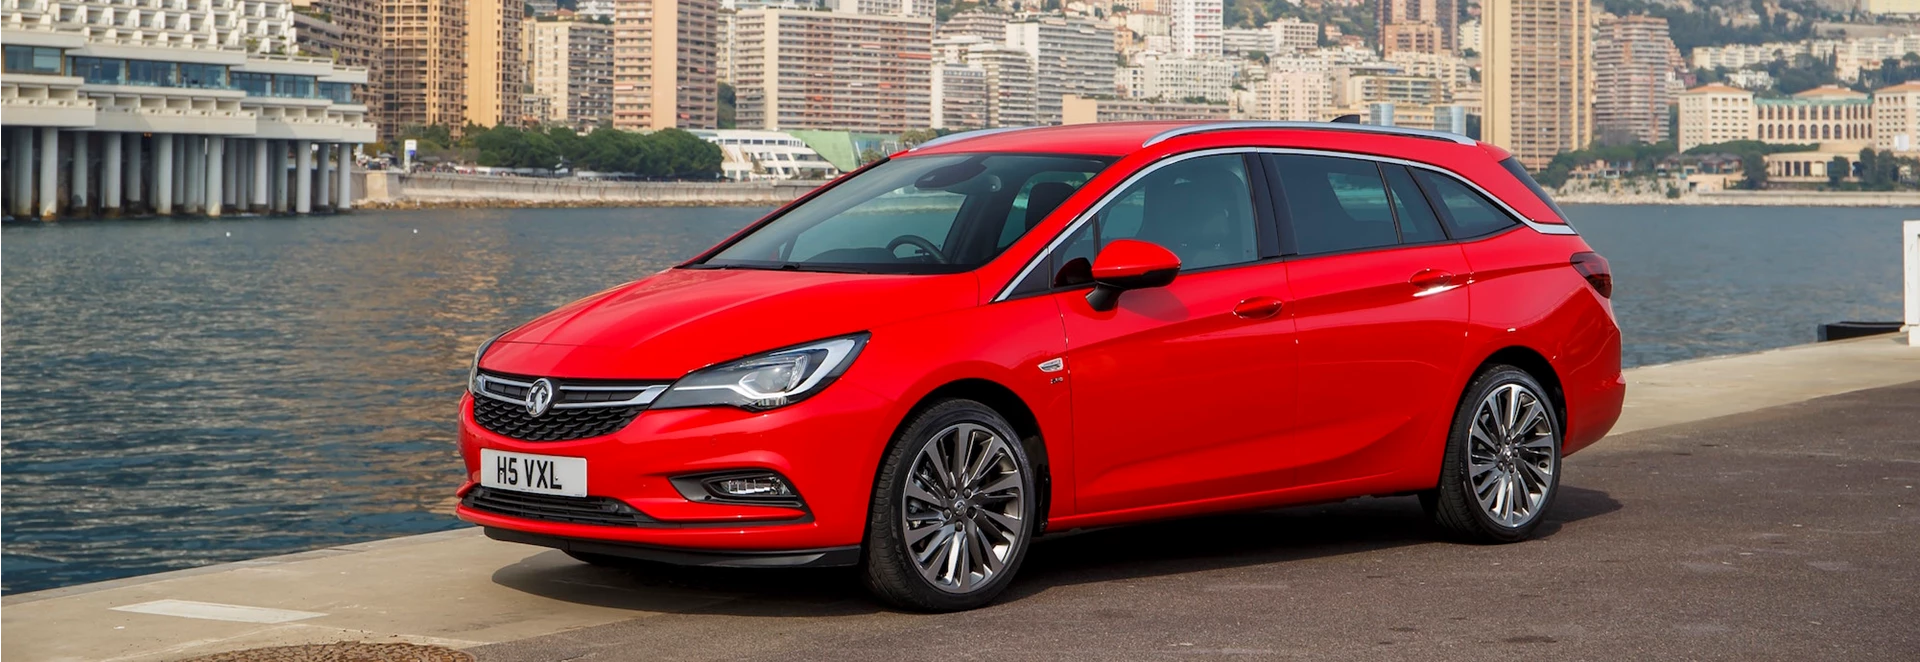 2018 Vauxhall Astra Sports Tourer Review